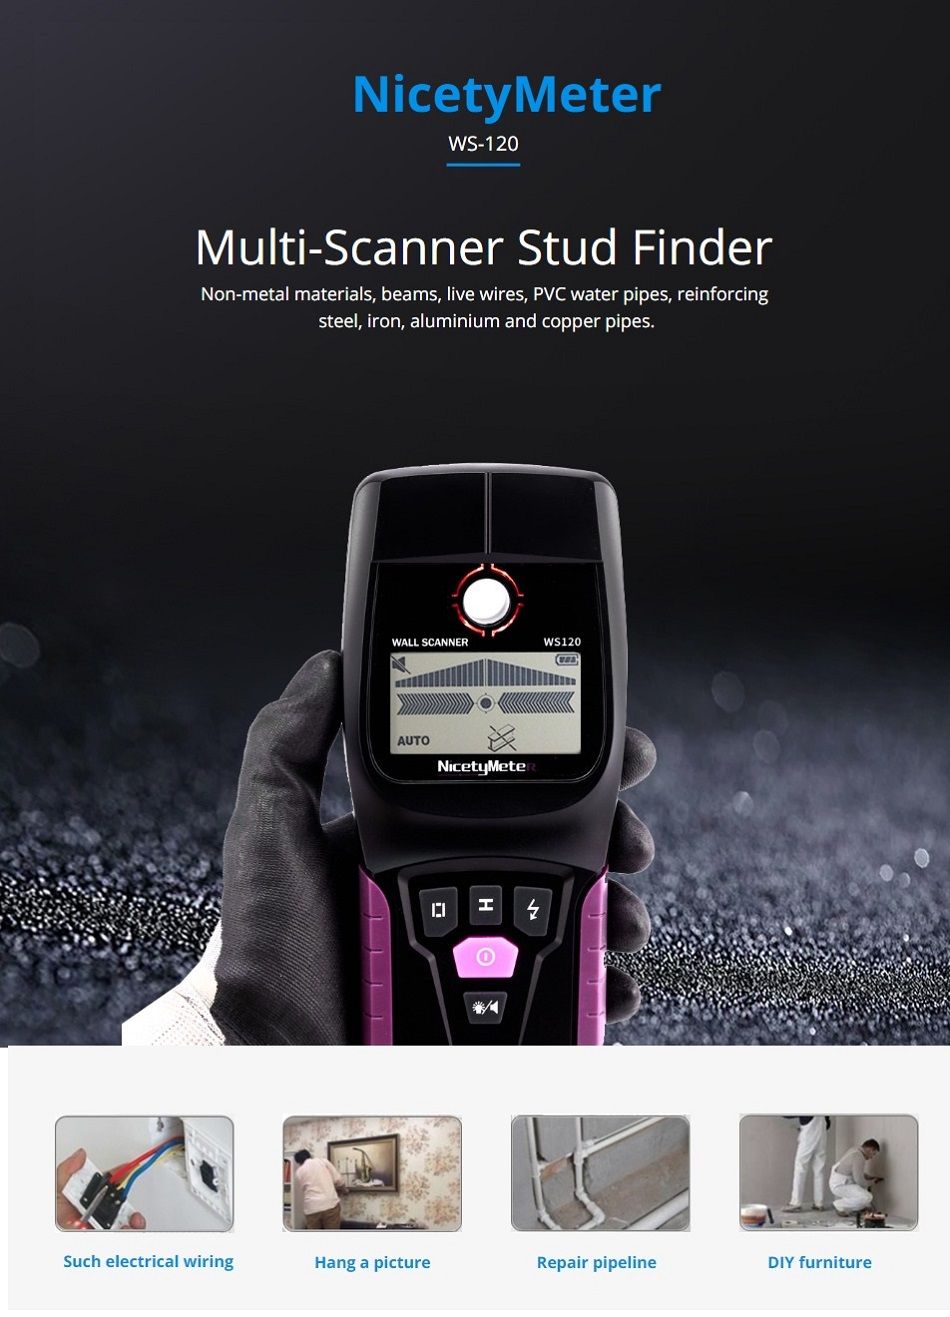 WS120-Multi-Scanner-Stud-Finder-AC-Wood-Cable-Wires-Depth-Tracker-Plumbing-Underground-Wall-Scanner--1722750